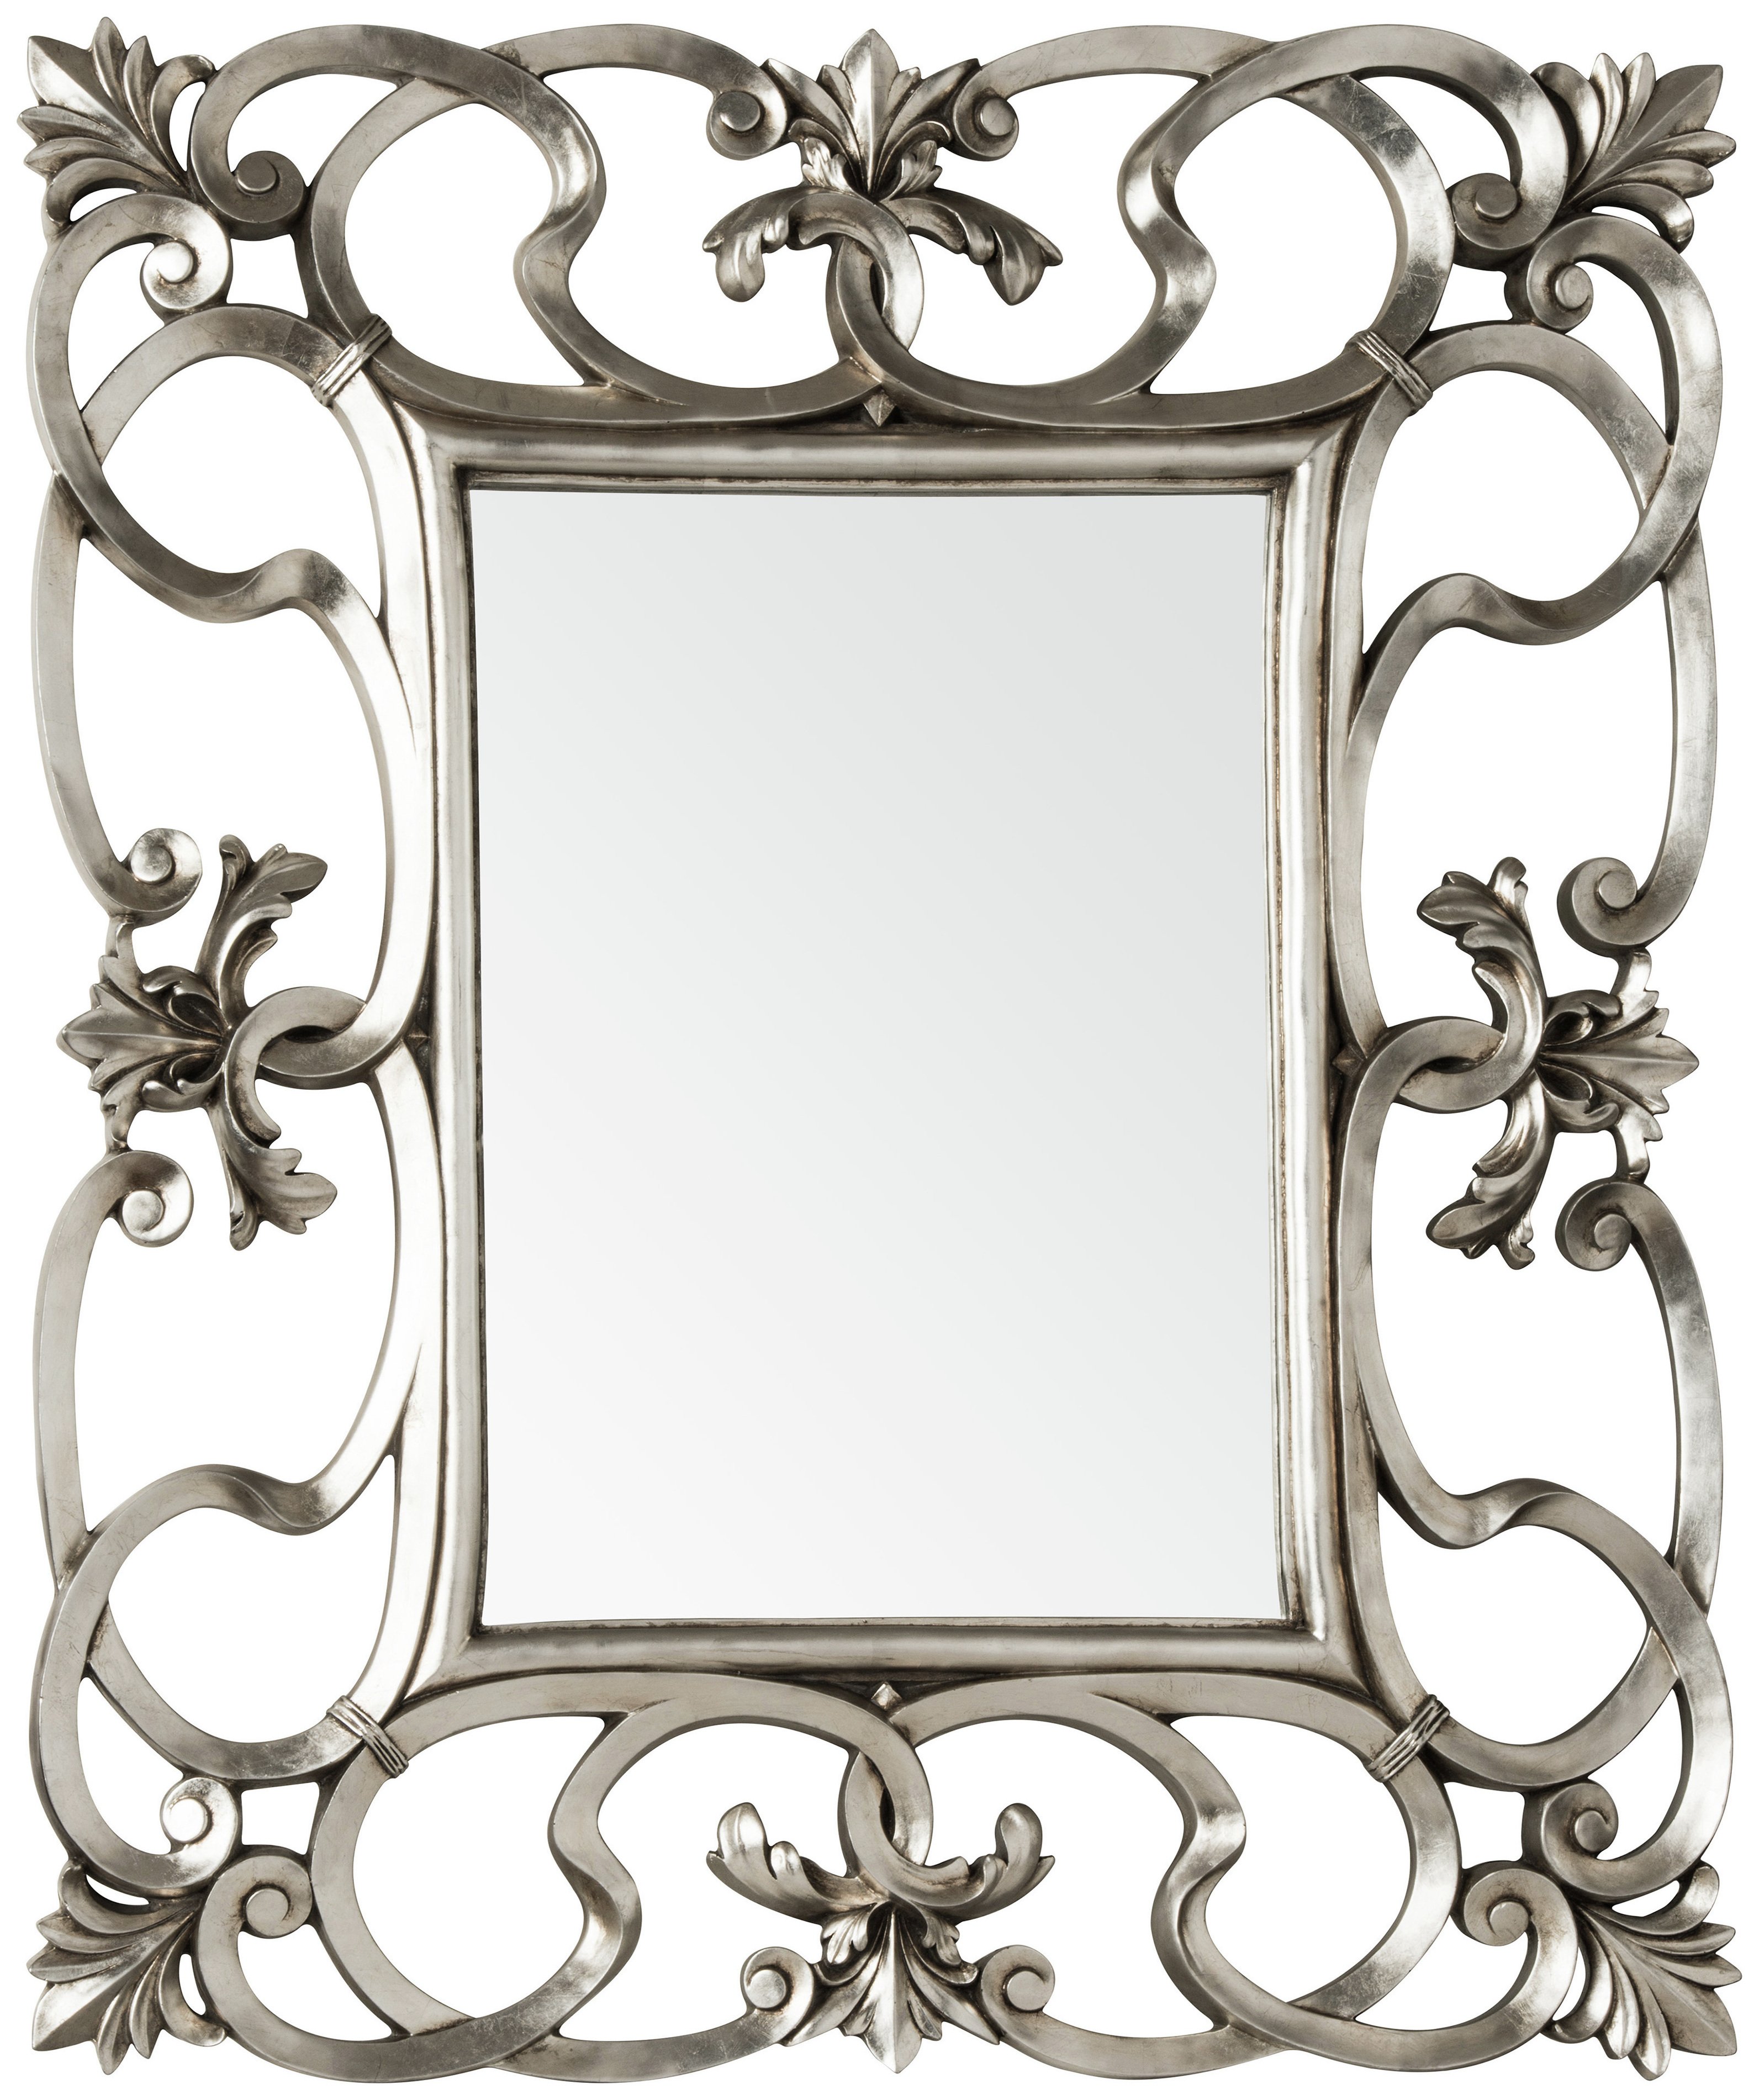 Premier Housewares Entwined Effect Wall Mirror - Champagne